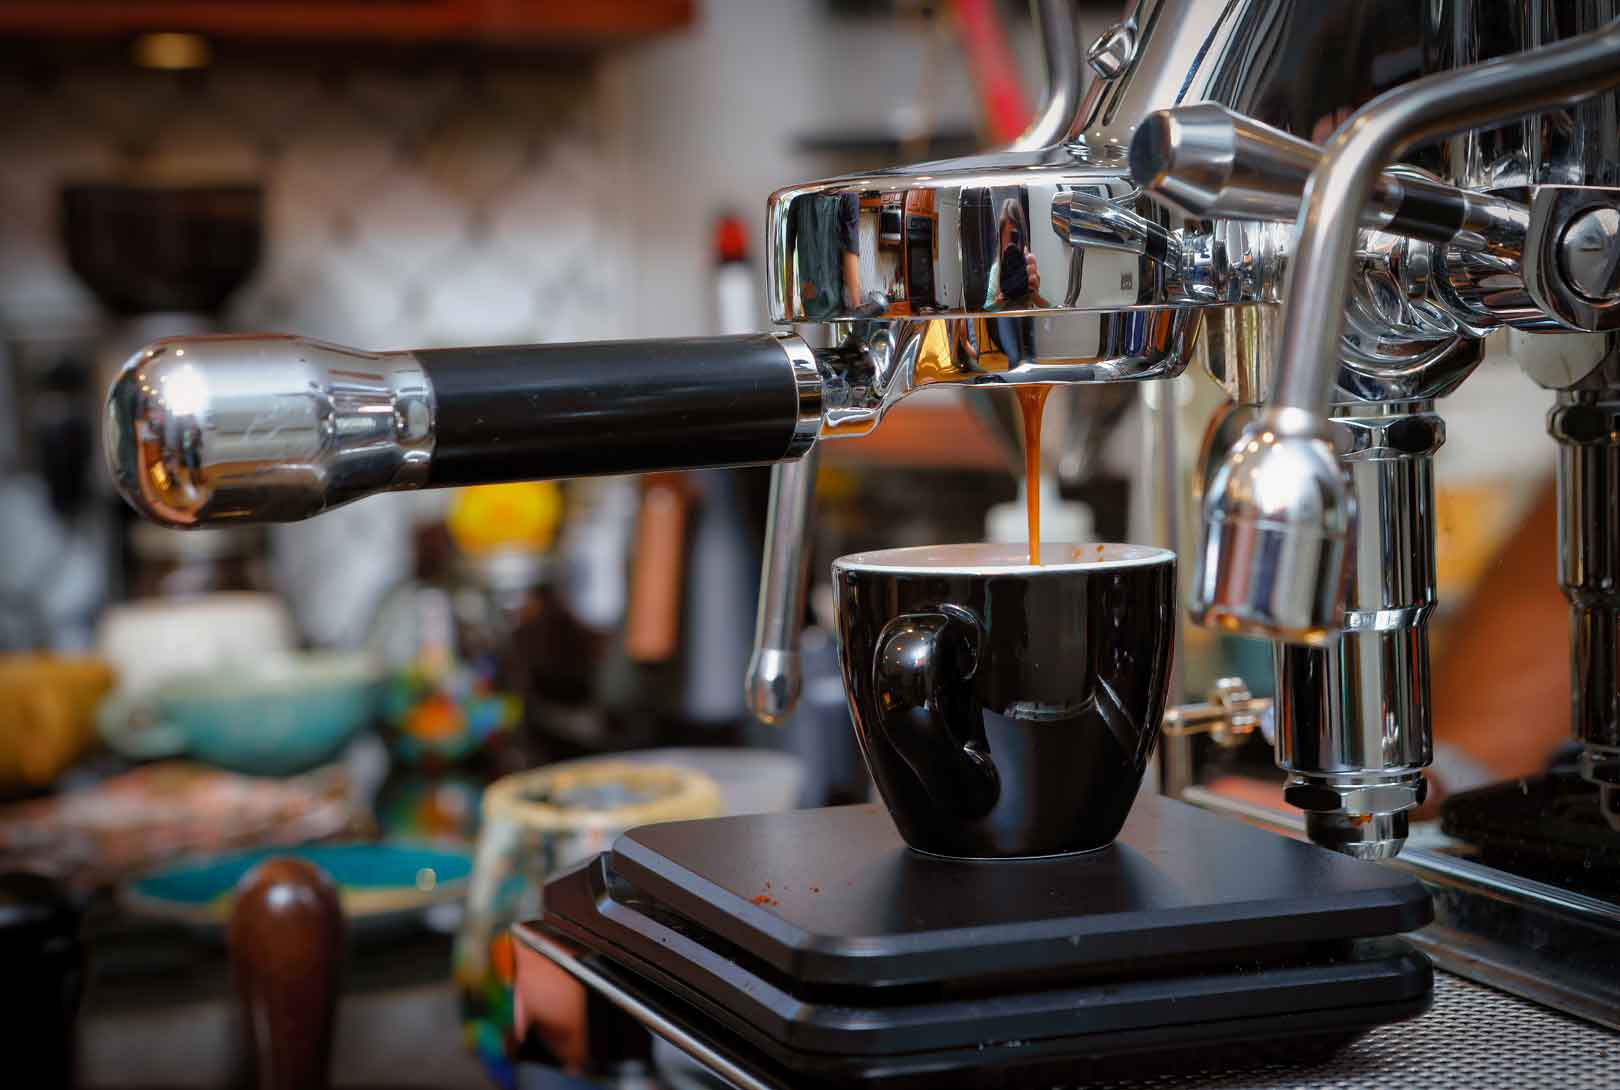 A commercial-grade expresso machine making expresso as it drips into a black cup in a home kitchen